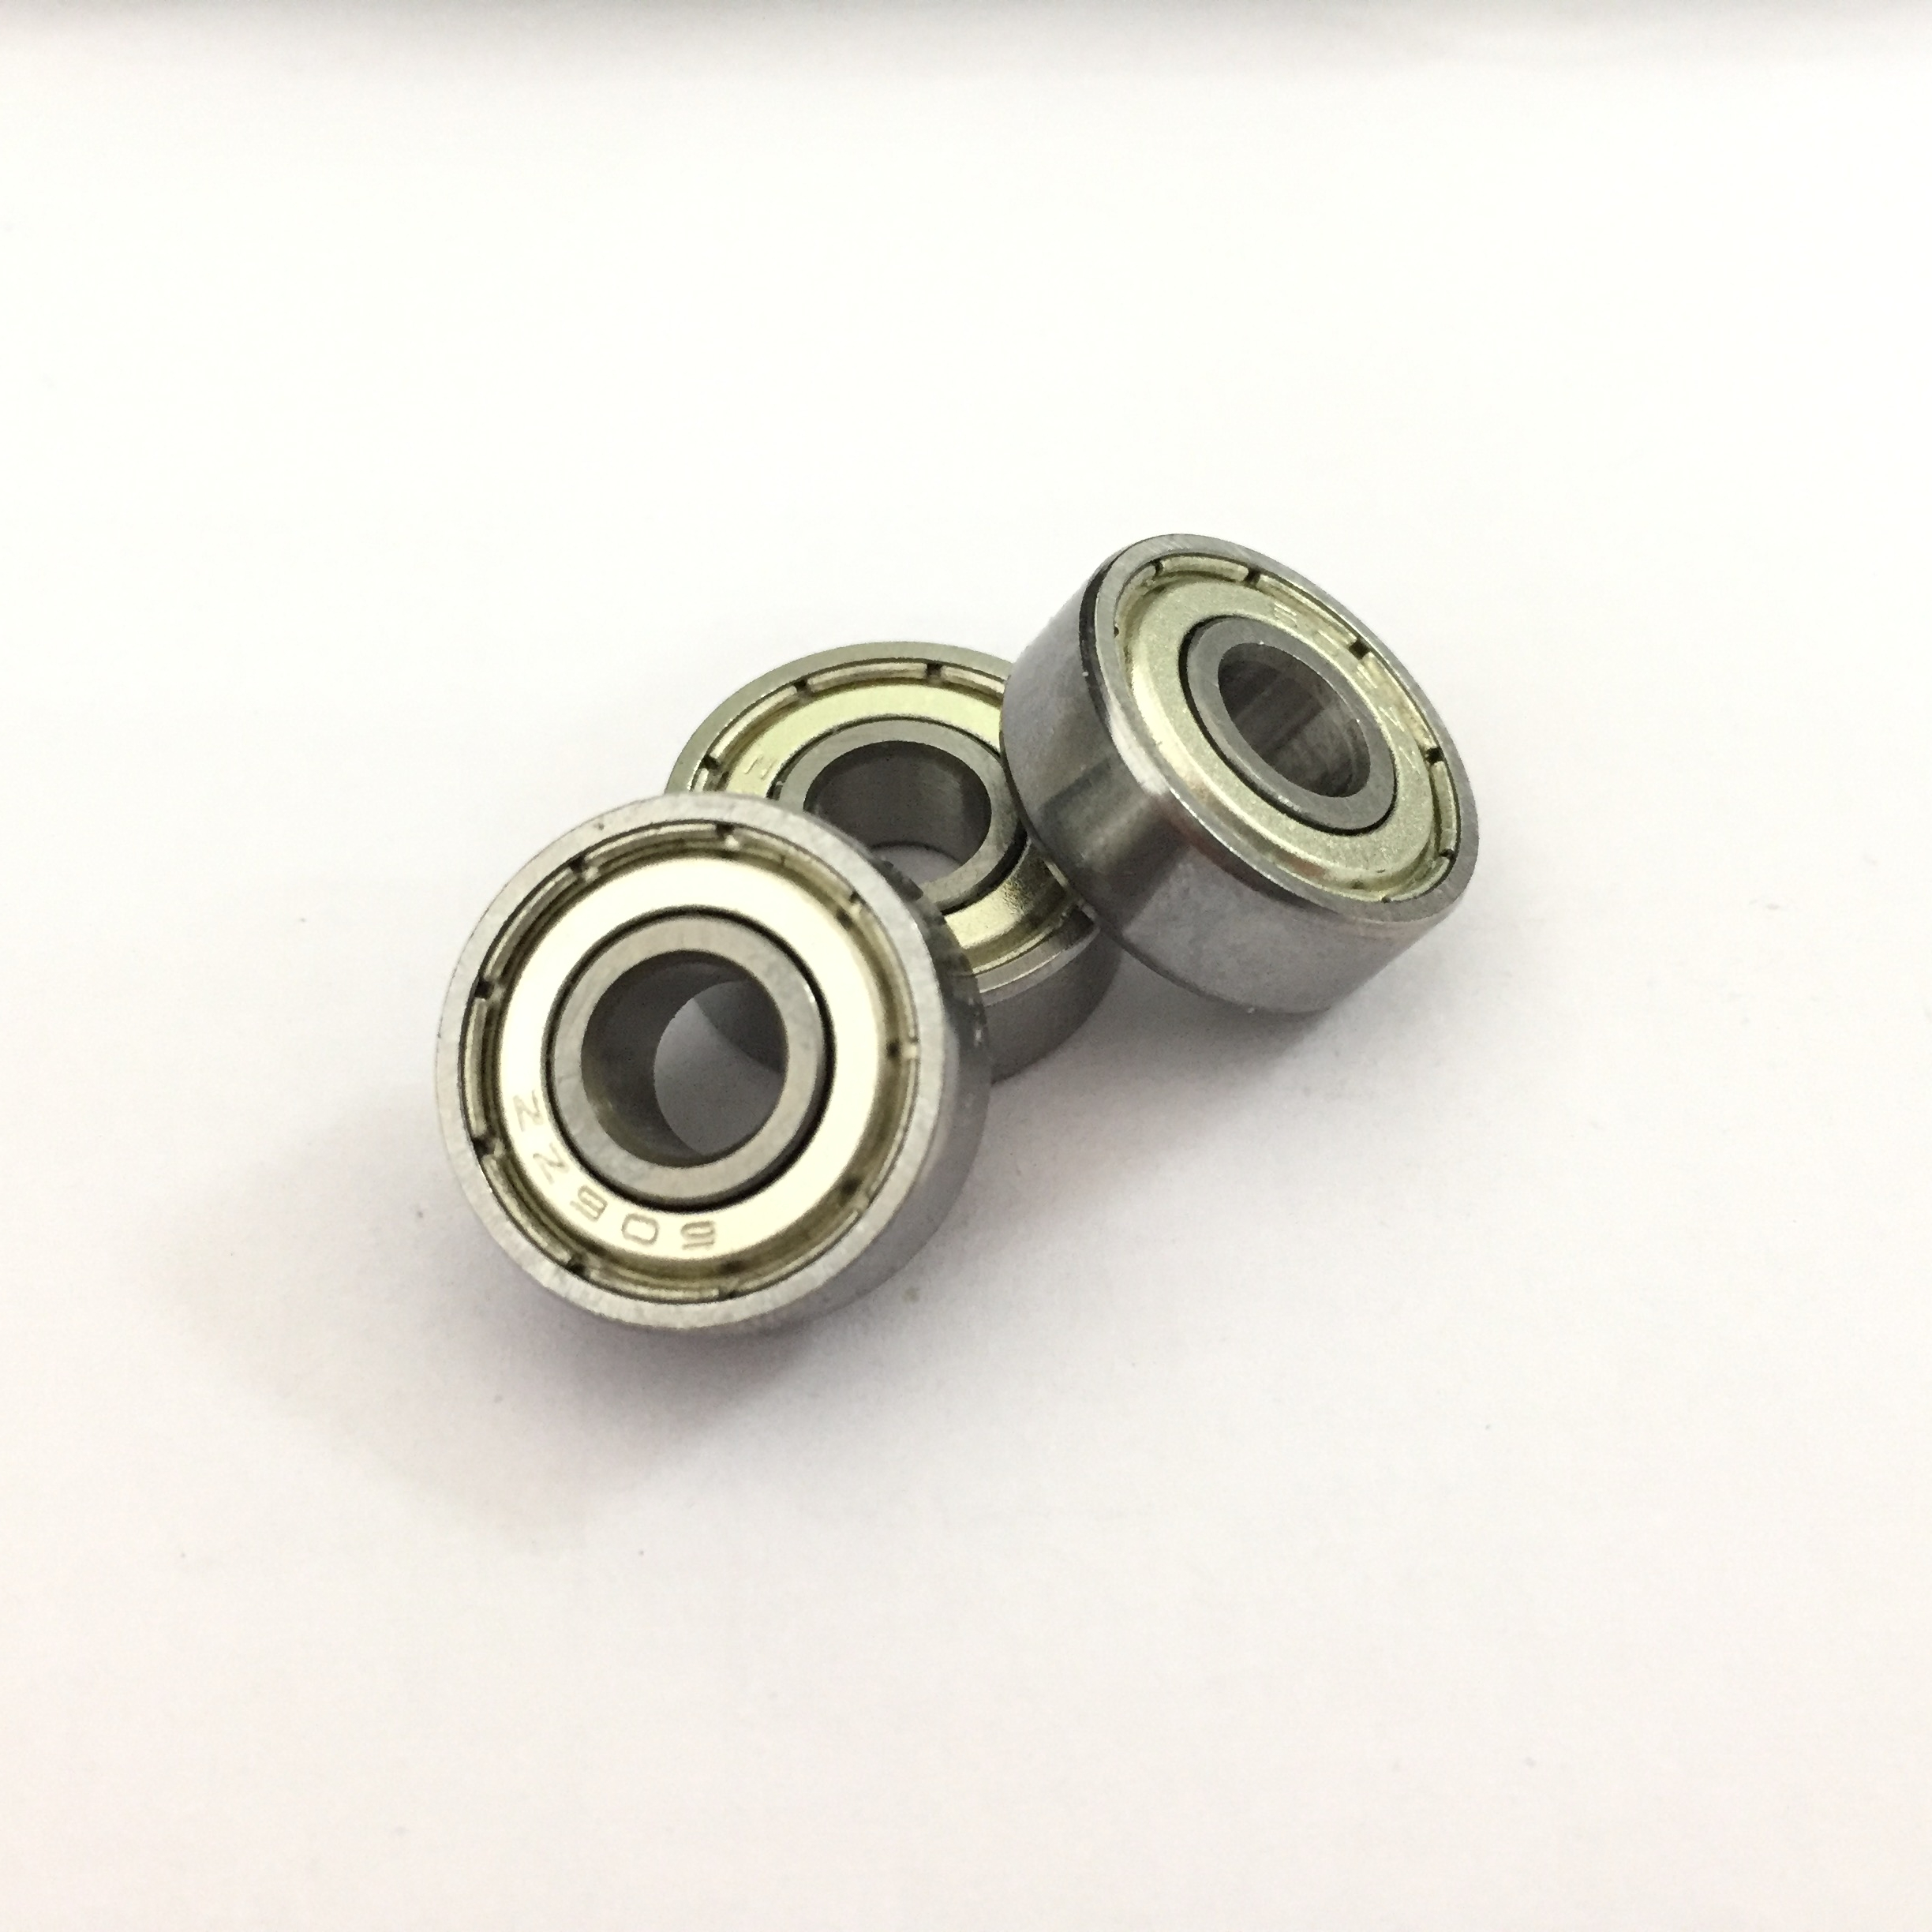 Hot Sale Low Noise Miniature Deep groove ball bearing 606zz for bicycle bike motorcycle